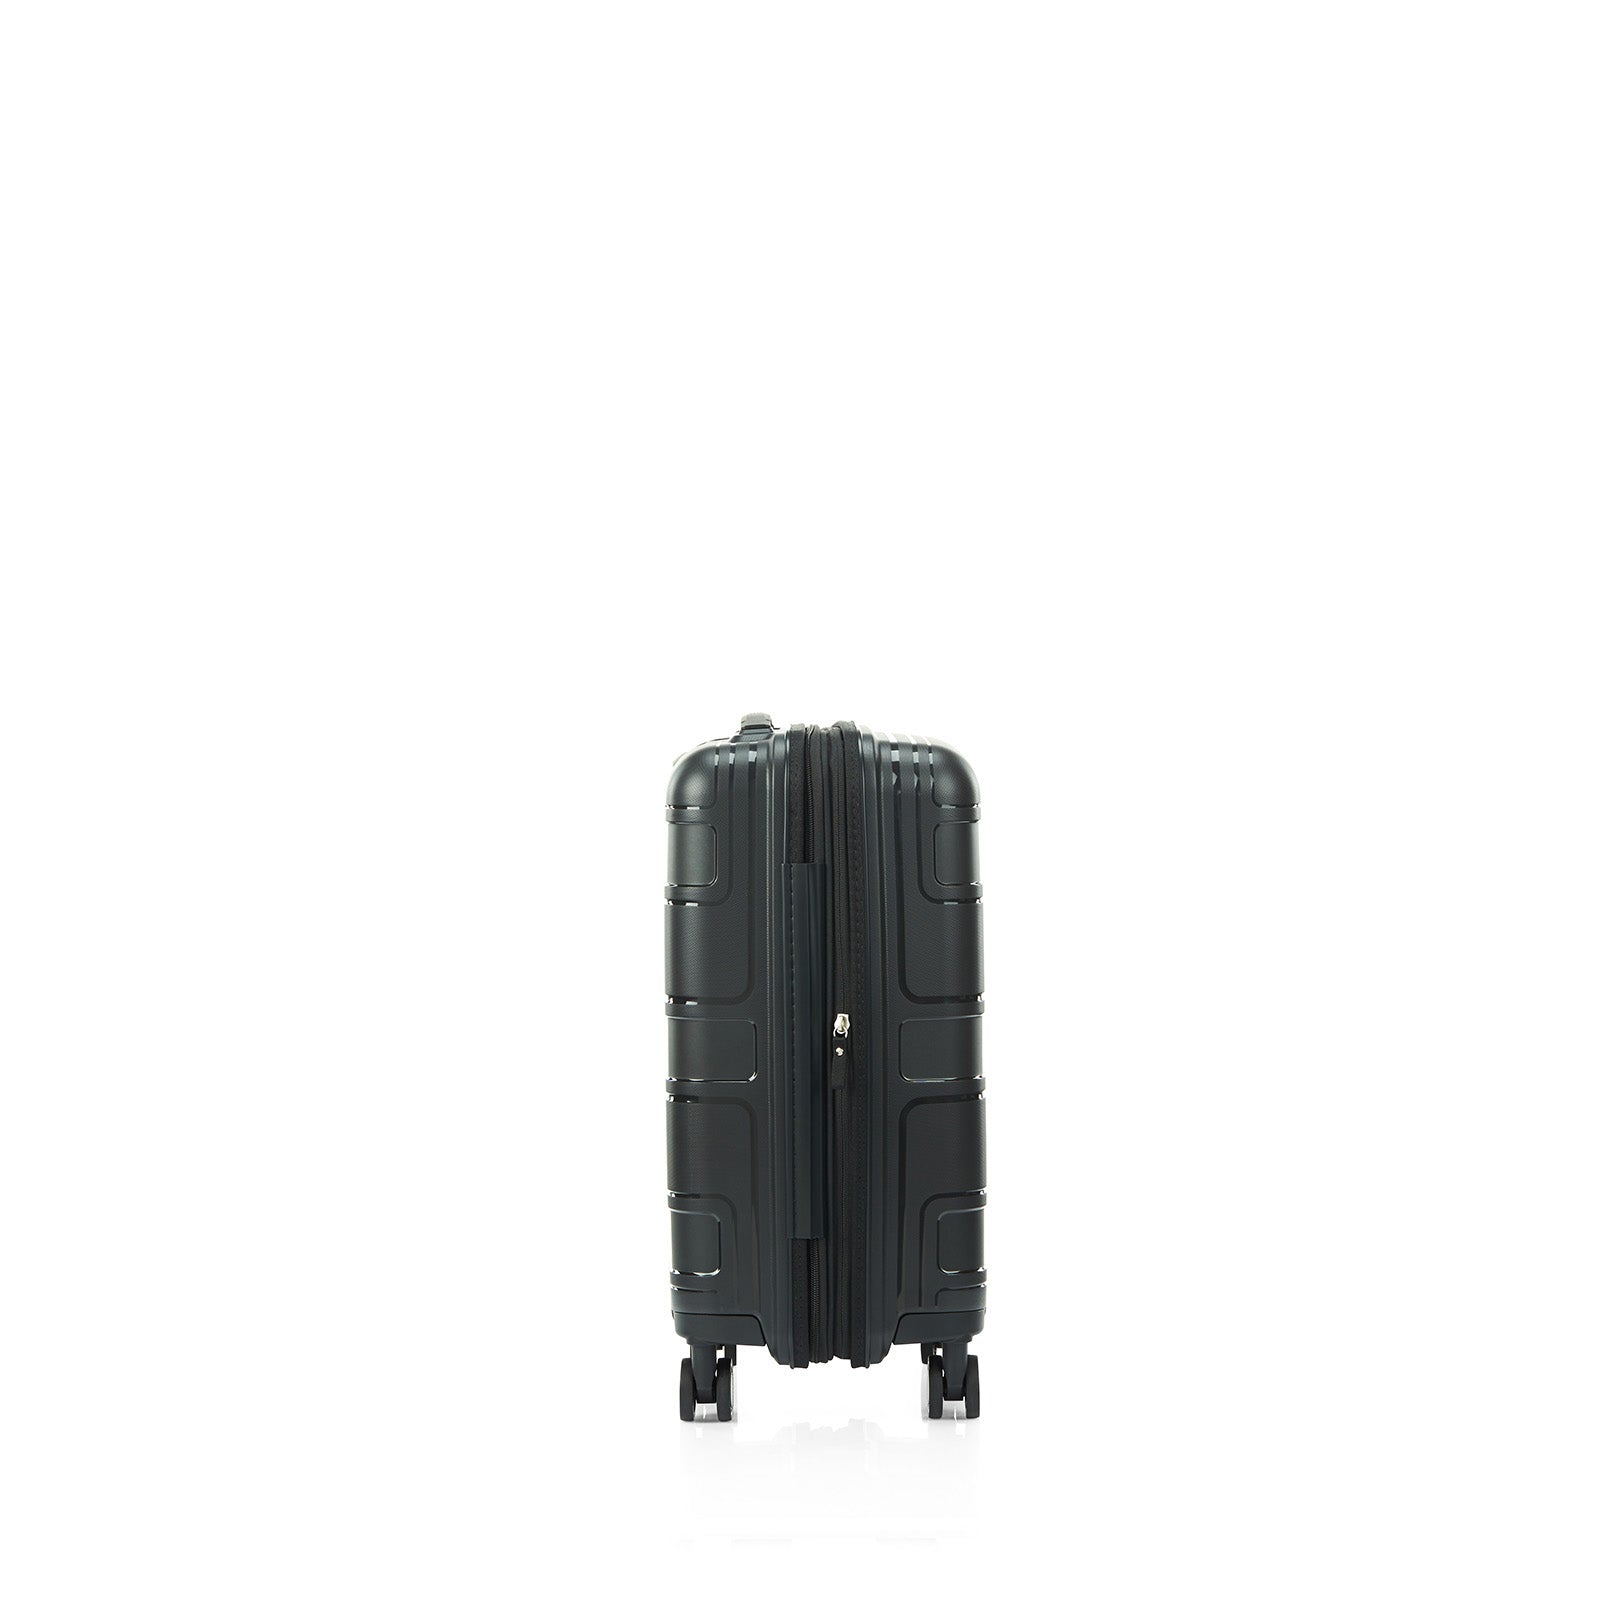 American-Tourister-Light-Max-55cm-Carry-On-Suitcase-Black-Side